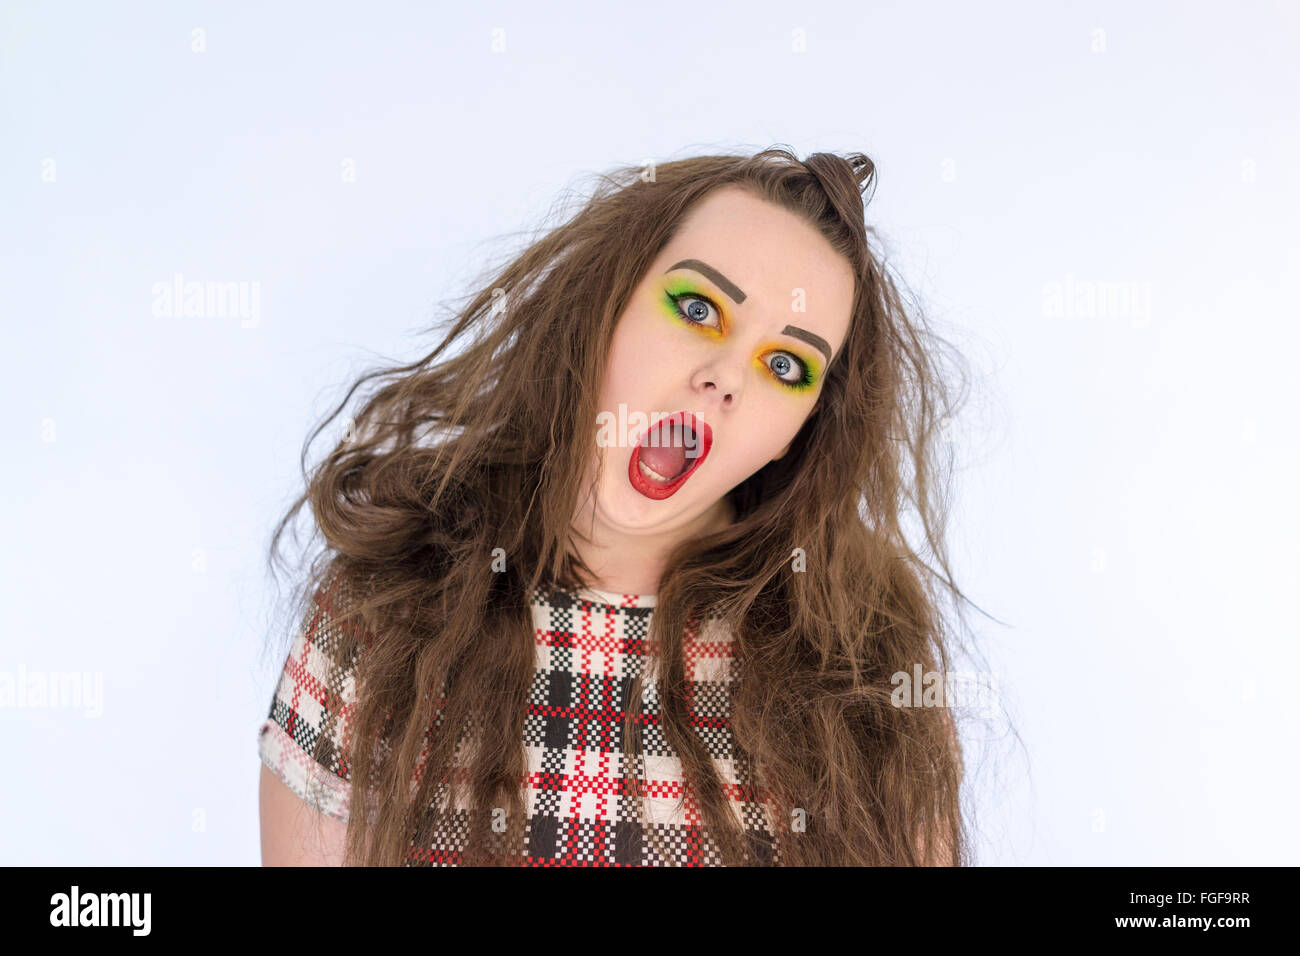 Teenage girl with long hair and bright make up screaming Stock Photo